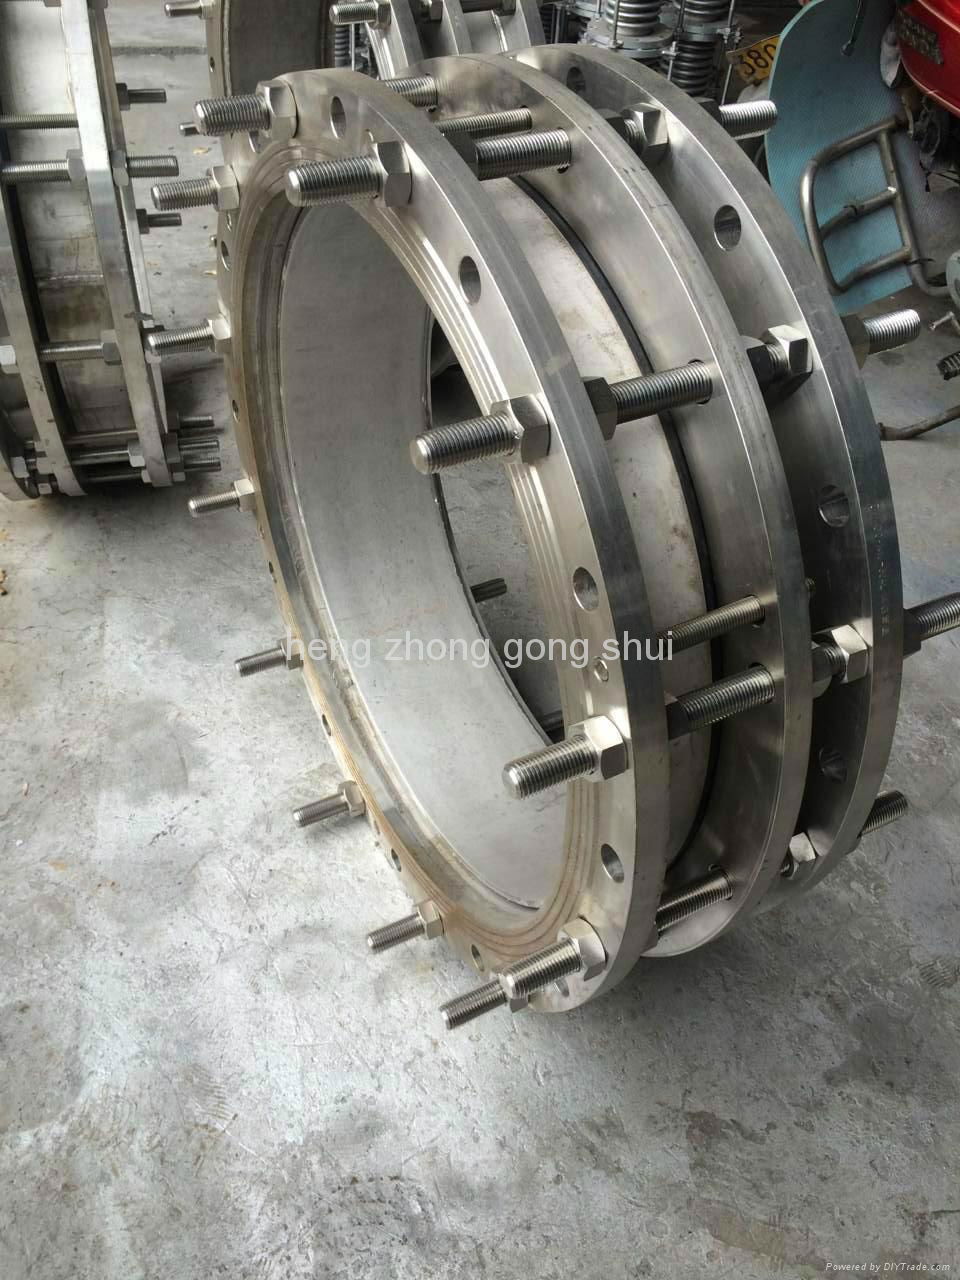 Double flange type metal dismantling joint 5